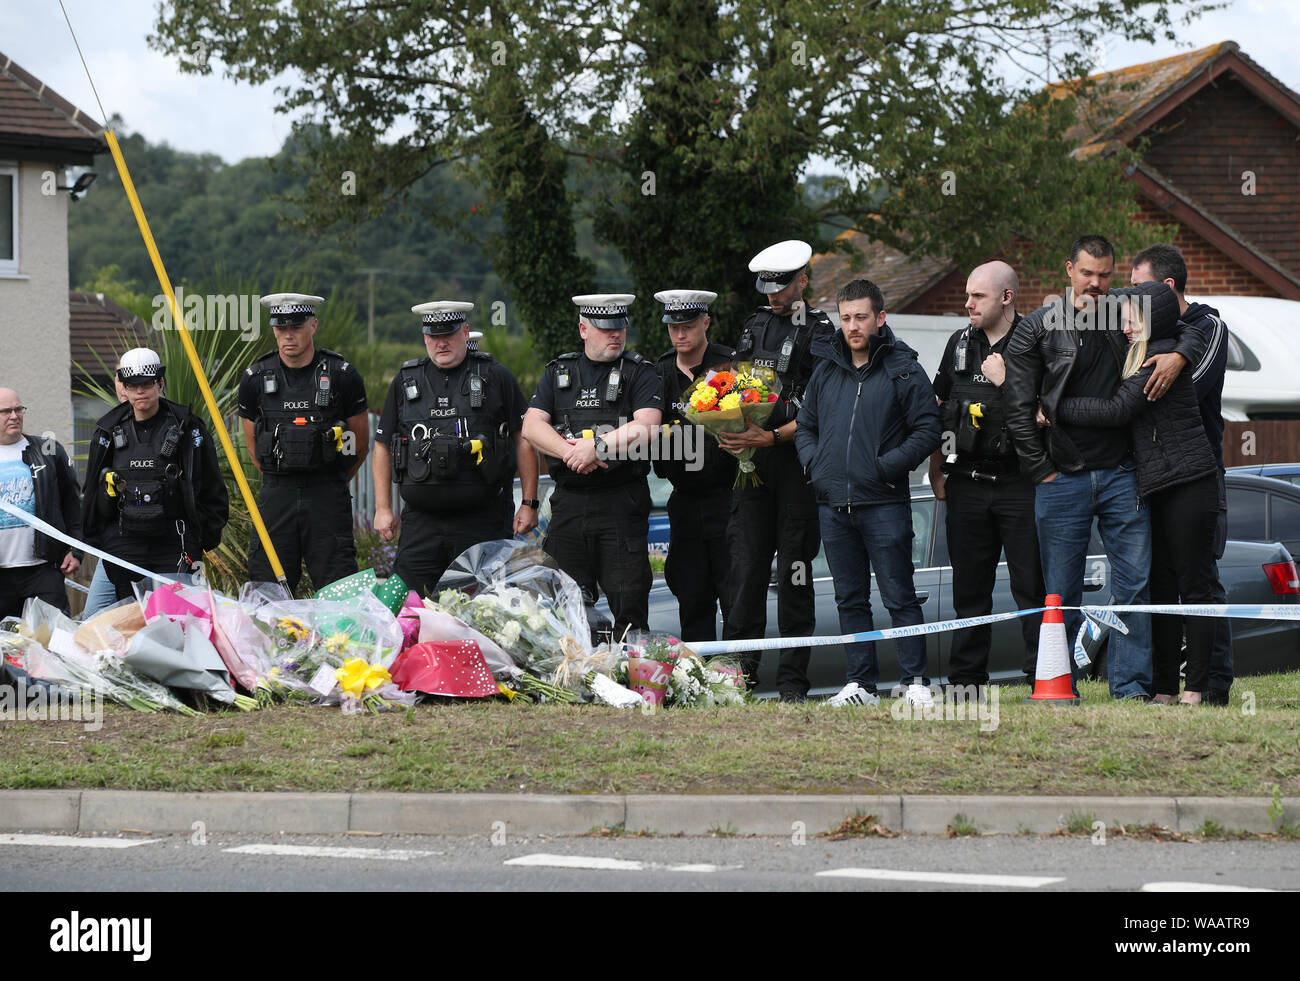 Members of the Thames Valley and Hampshire Roads Policing Team pay their respects in front of tributes at the scene near Ufton Lane, Sulhamstead, Berkshire, where Thames Valley Police officer Pc Andrew Harper, 28, died following a 'serious incident' at about 11.30pm on Thursday near the A4 Bath Road, between Reading and Newbury, at the village of Sulhamstead in Berkshire. Stock Photo